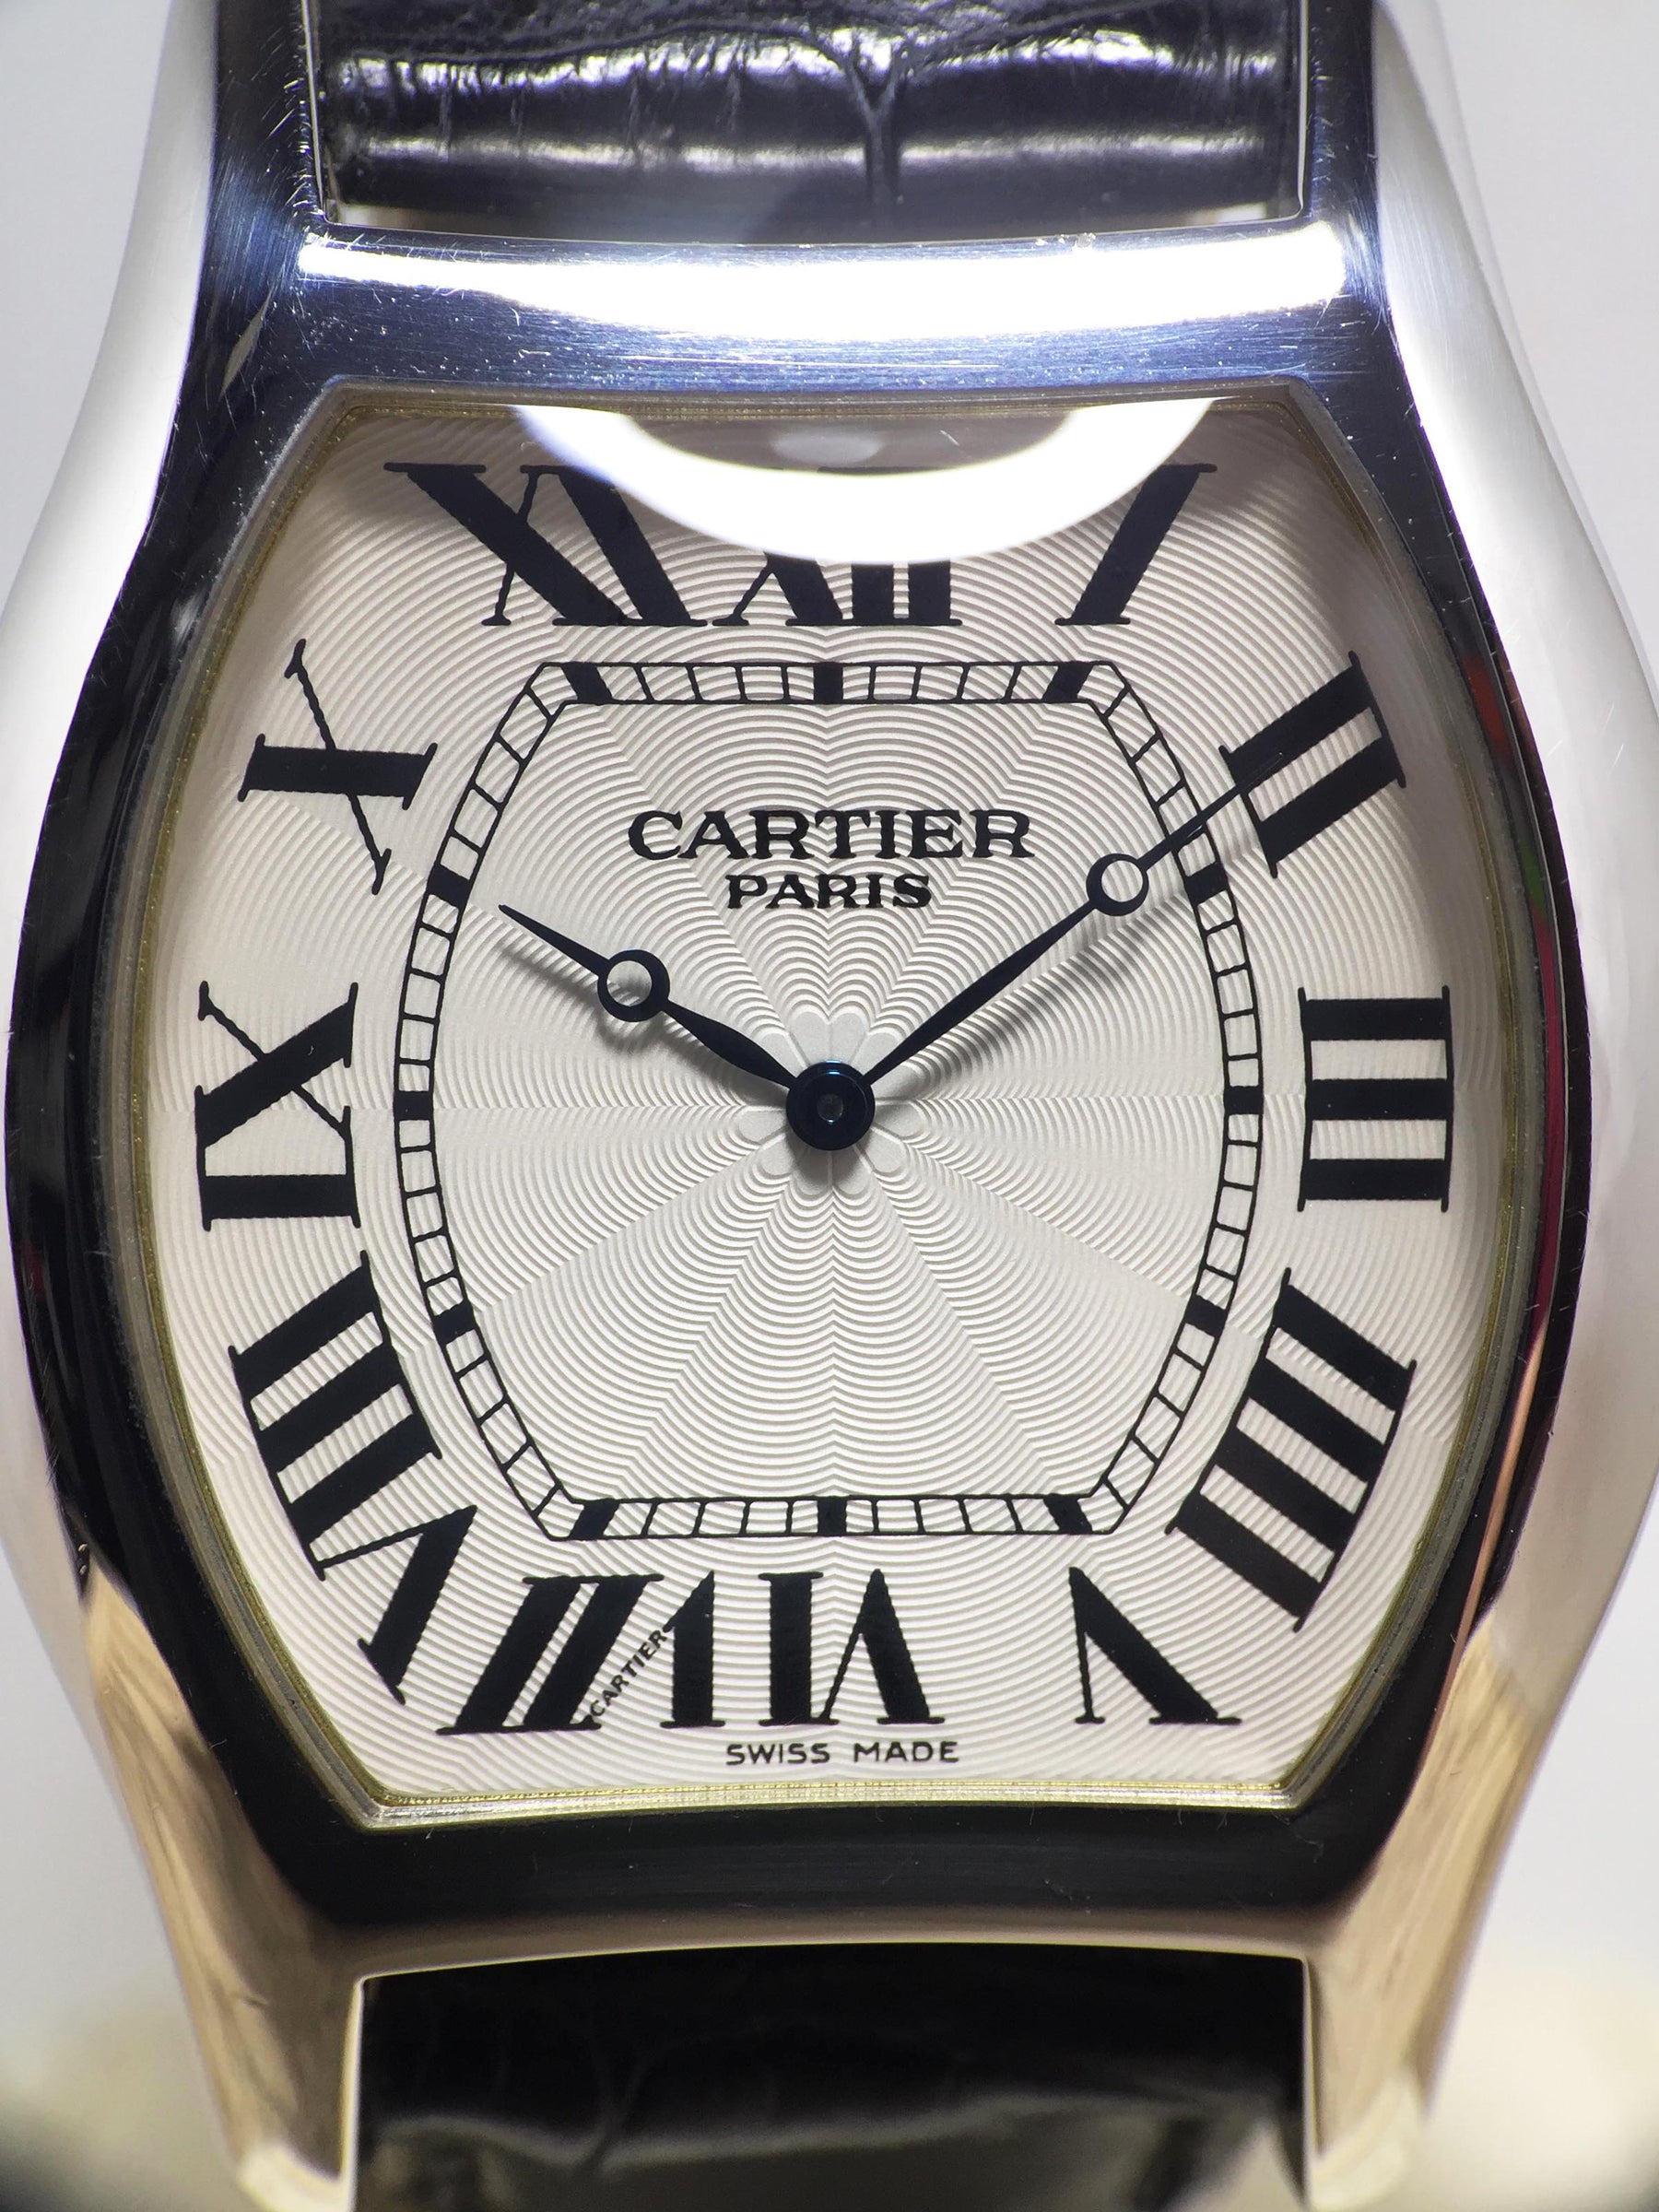 2007 Cartier Tortue XL Platinum CPCP No.1 Ref. W1546151 (Full Set with Invoice )